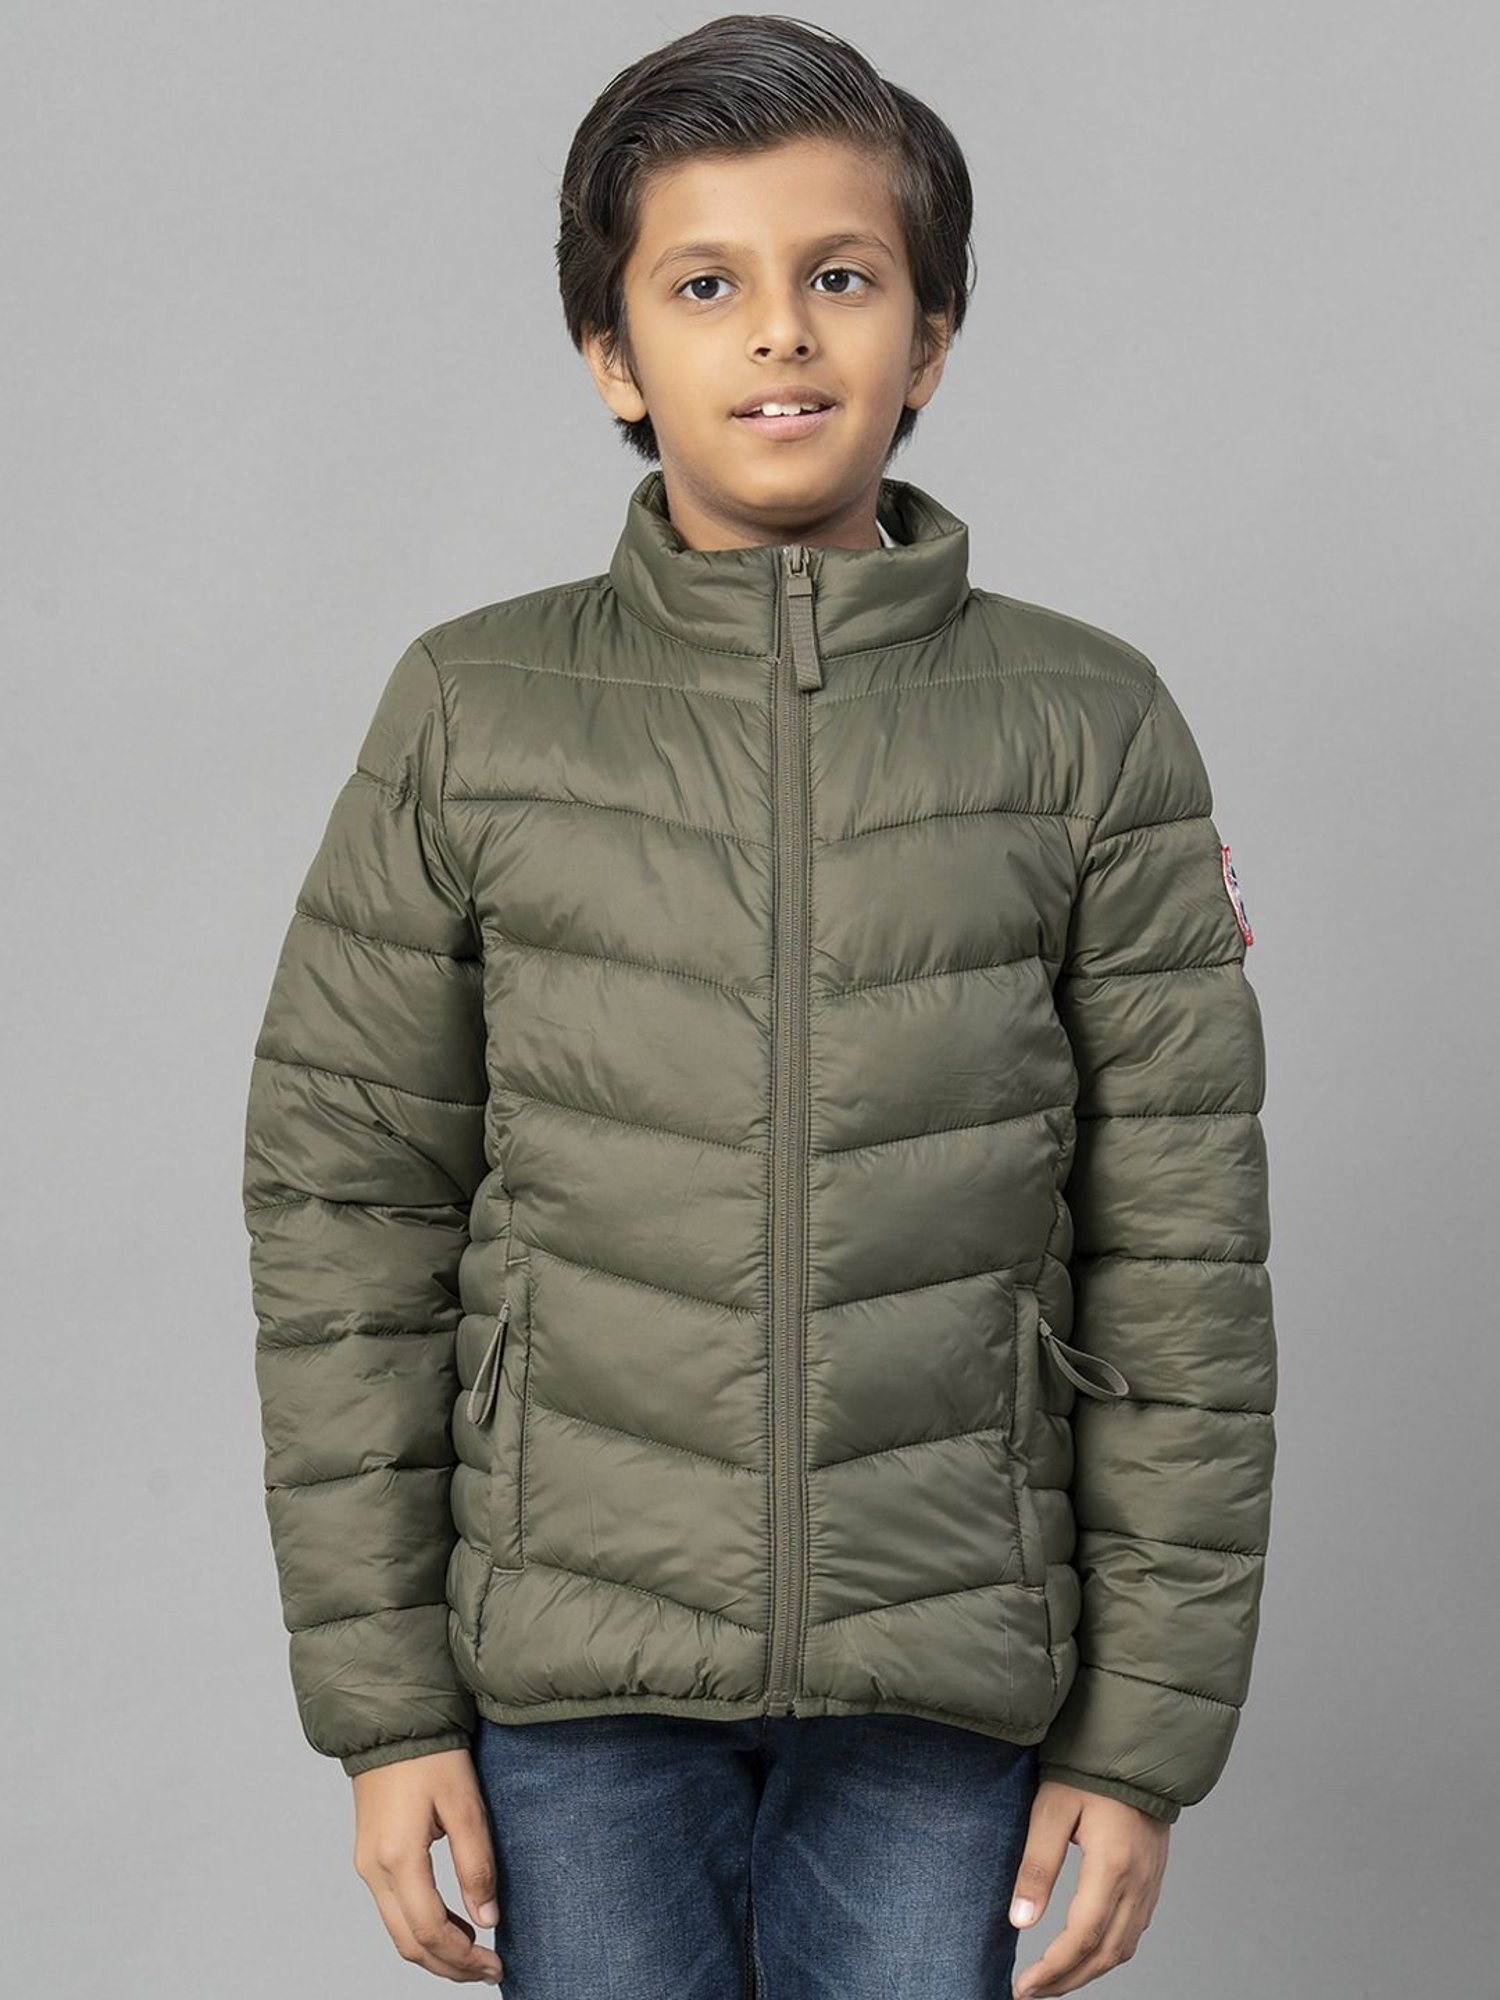 Buy Woolrich Little Boys' Army Jacket, Green, 4T at Amazon.in